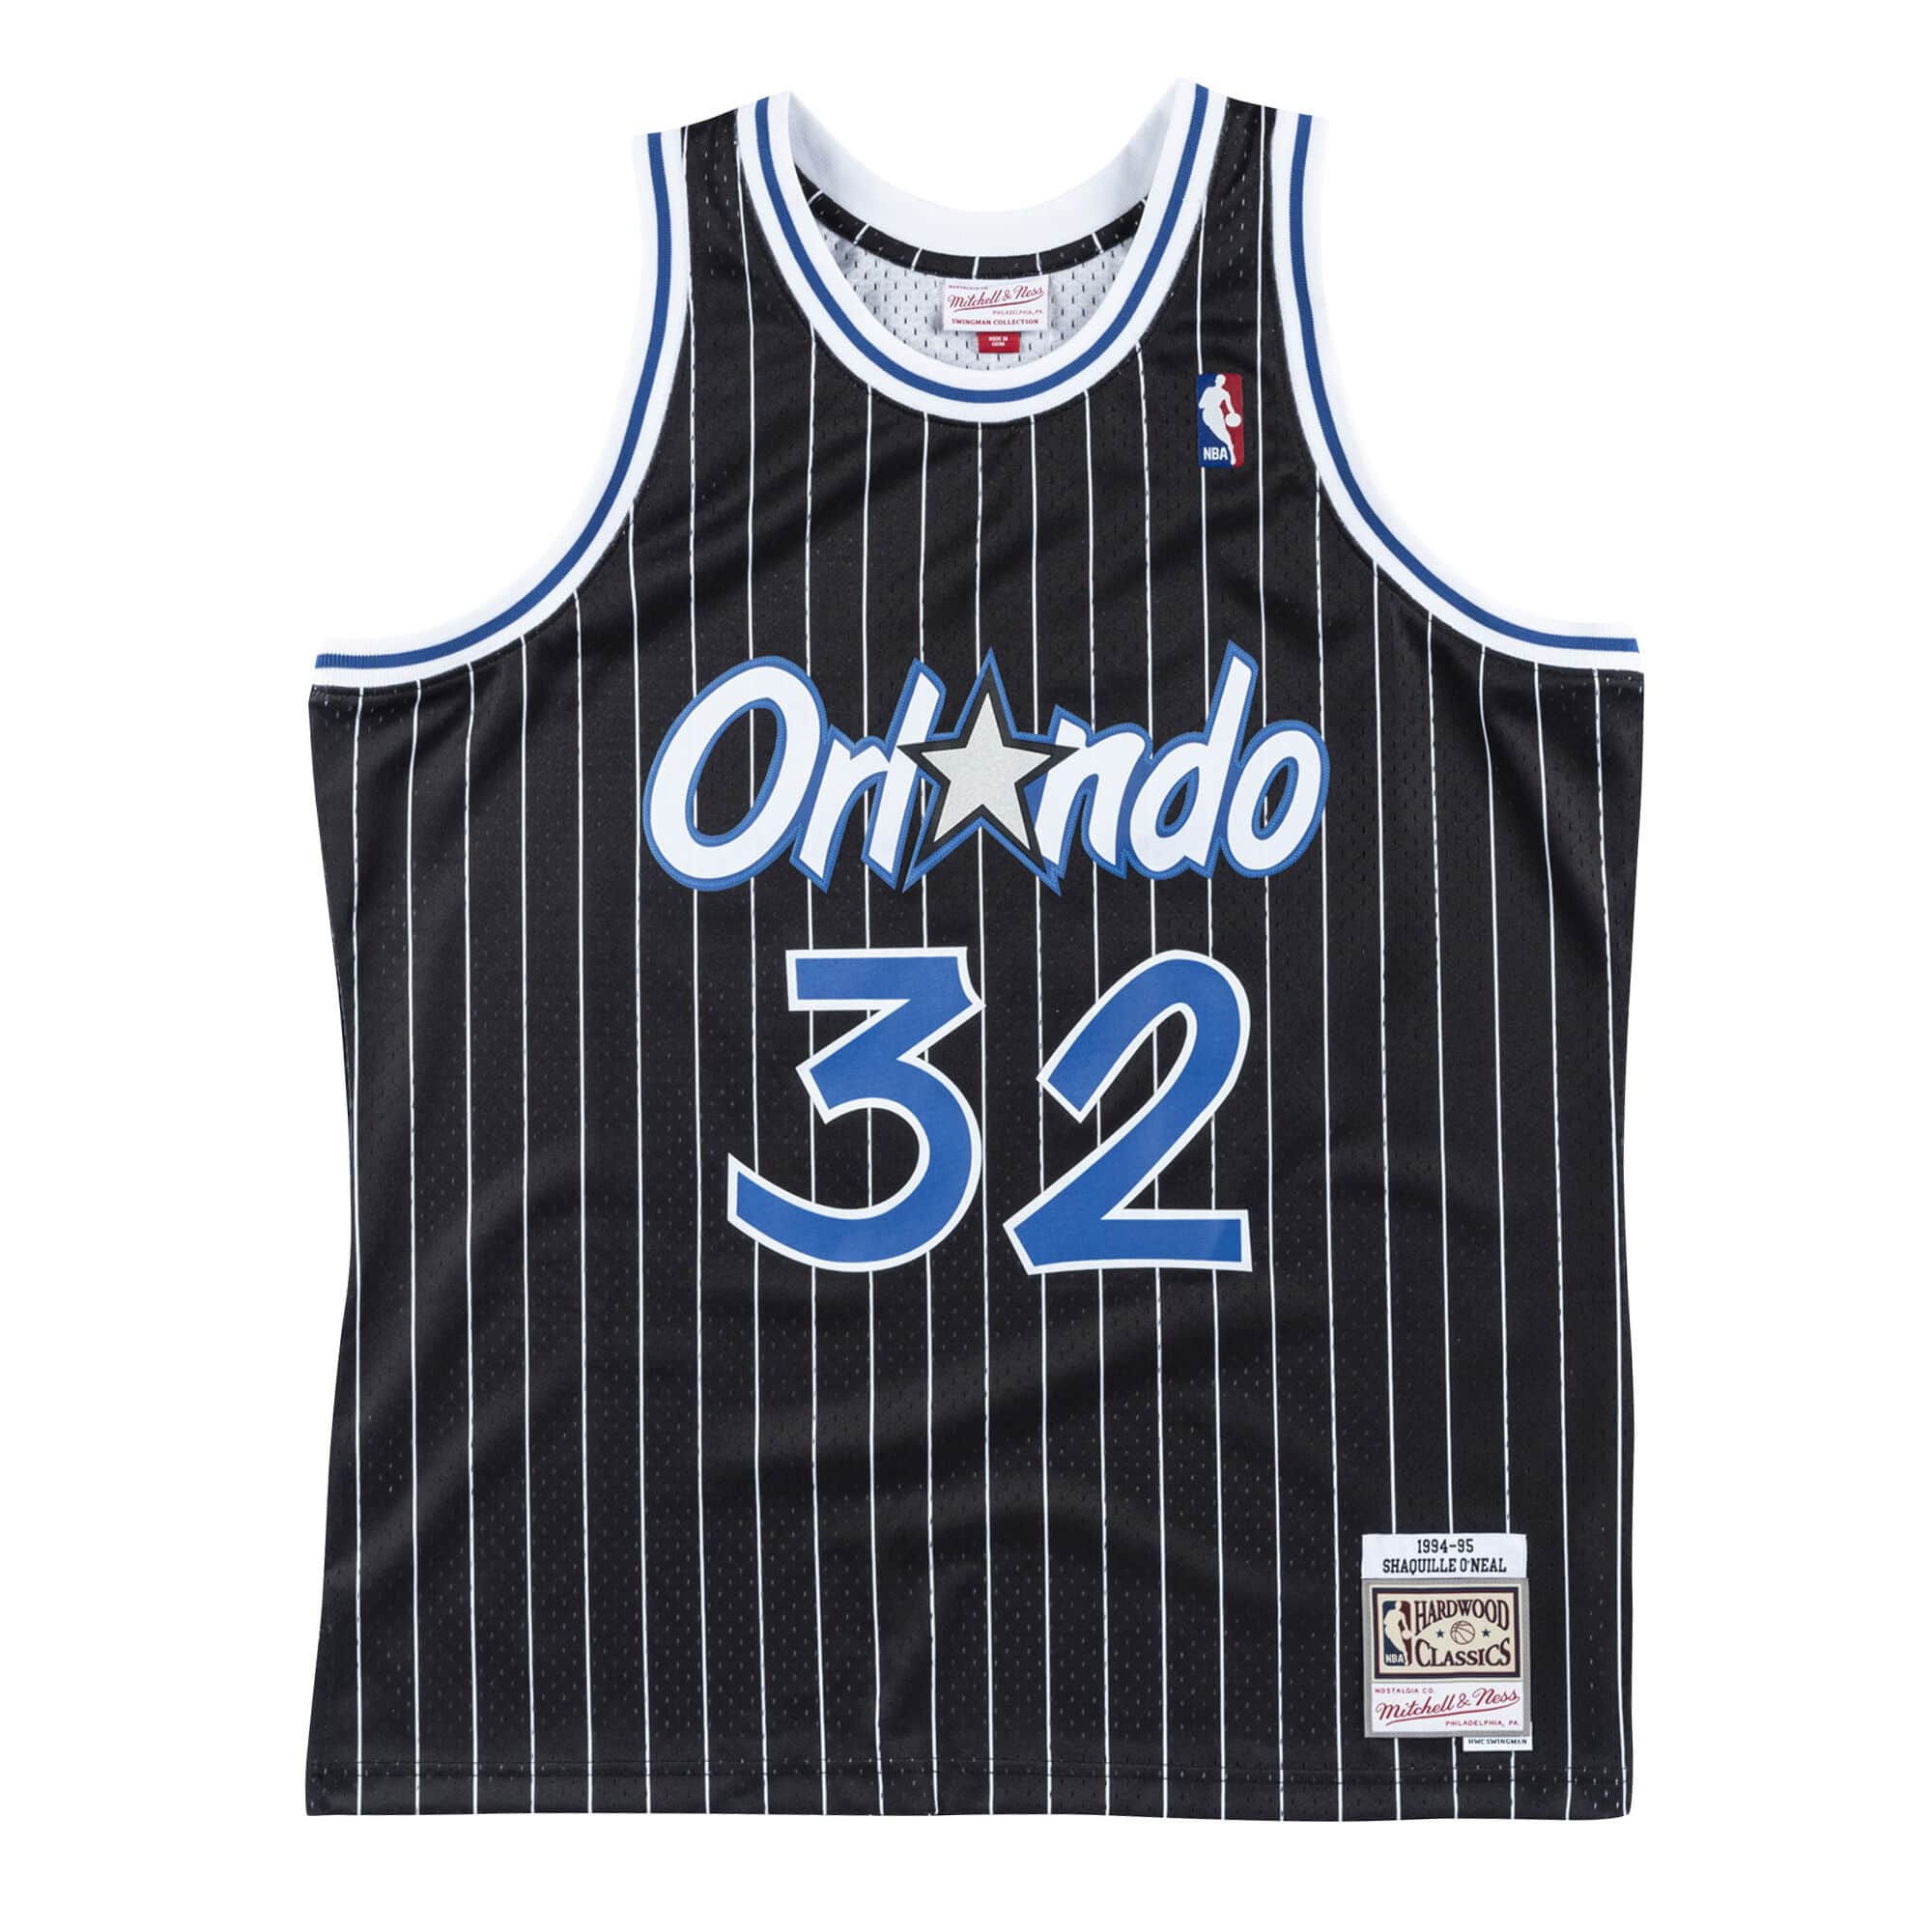 mitchell-and-ness-swingman-shaquille-oneal-orlando-magic-nba-1994-95-jersey-youth-9n2b7blt0-magos